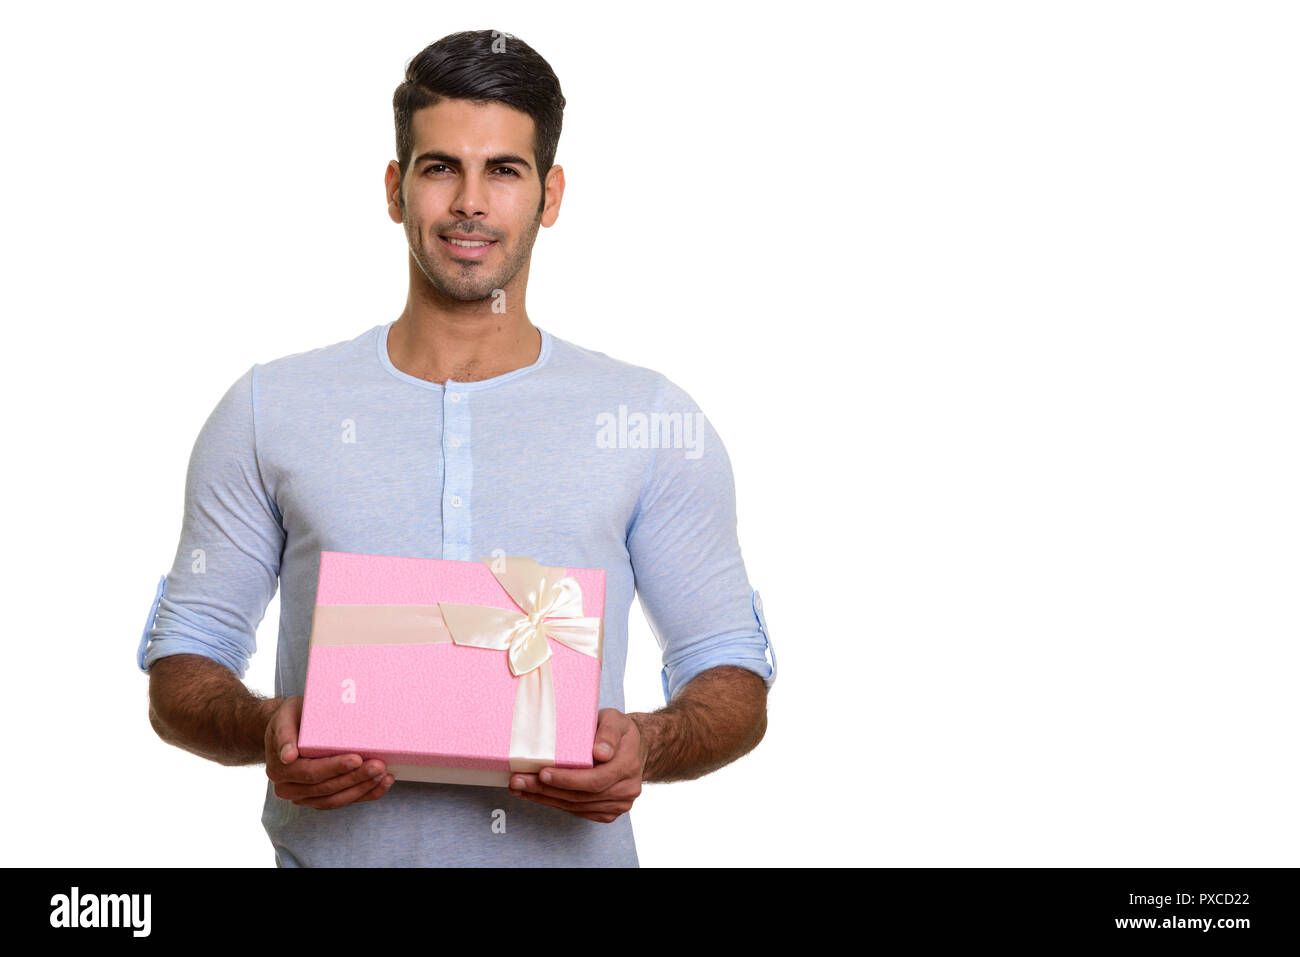 Les jeunes professionnels Persian man smiling and holding gift box Banque D'Images